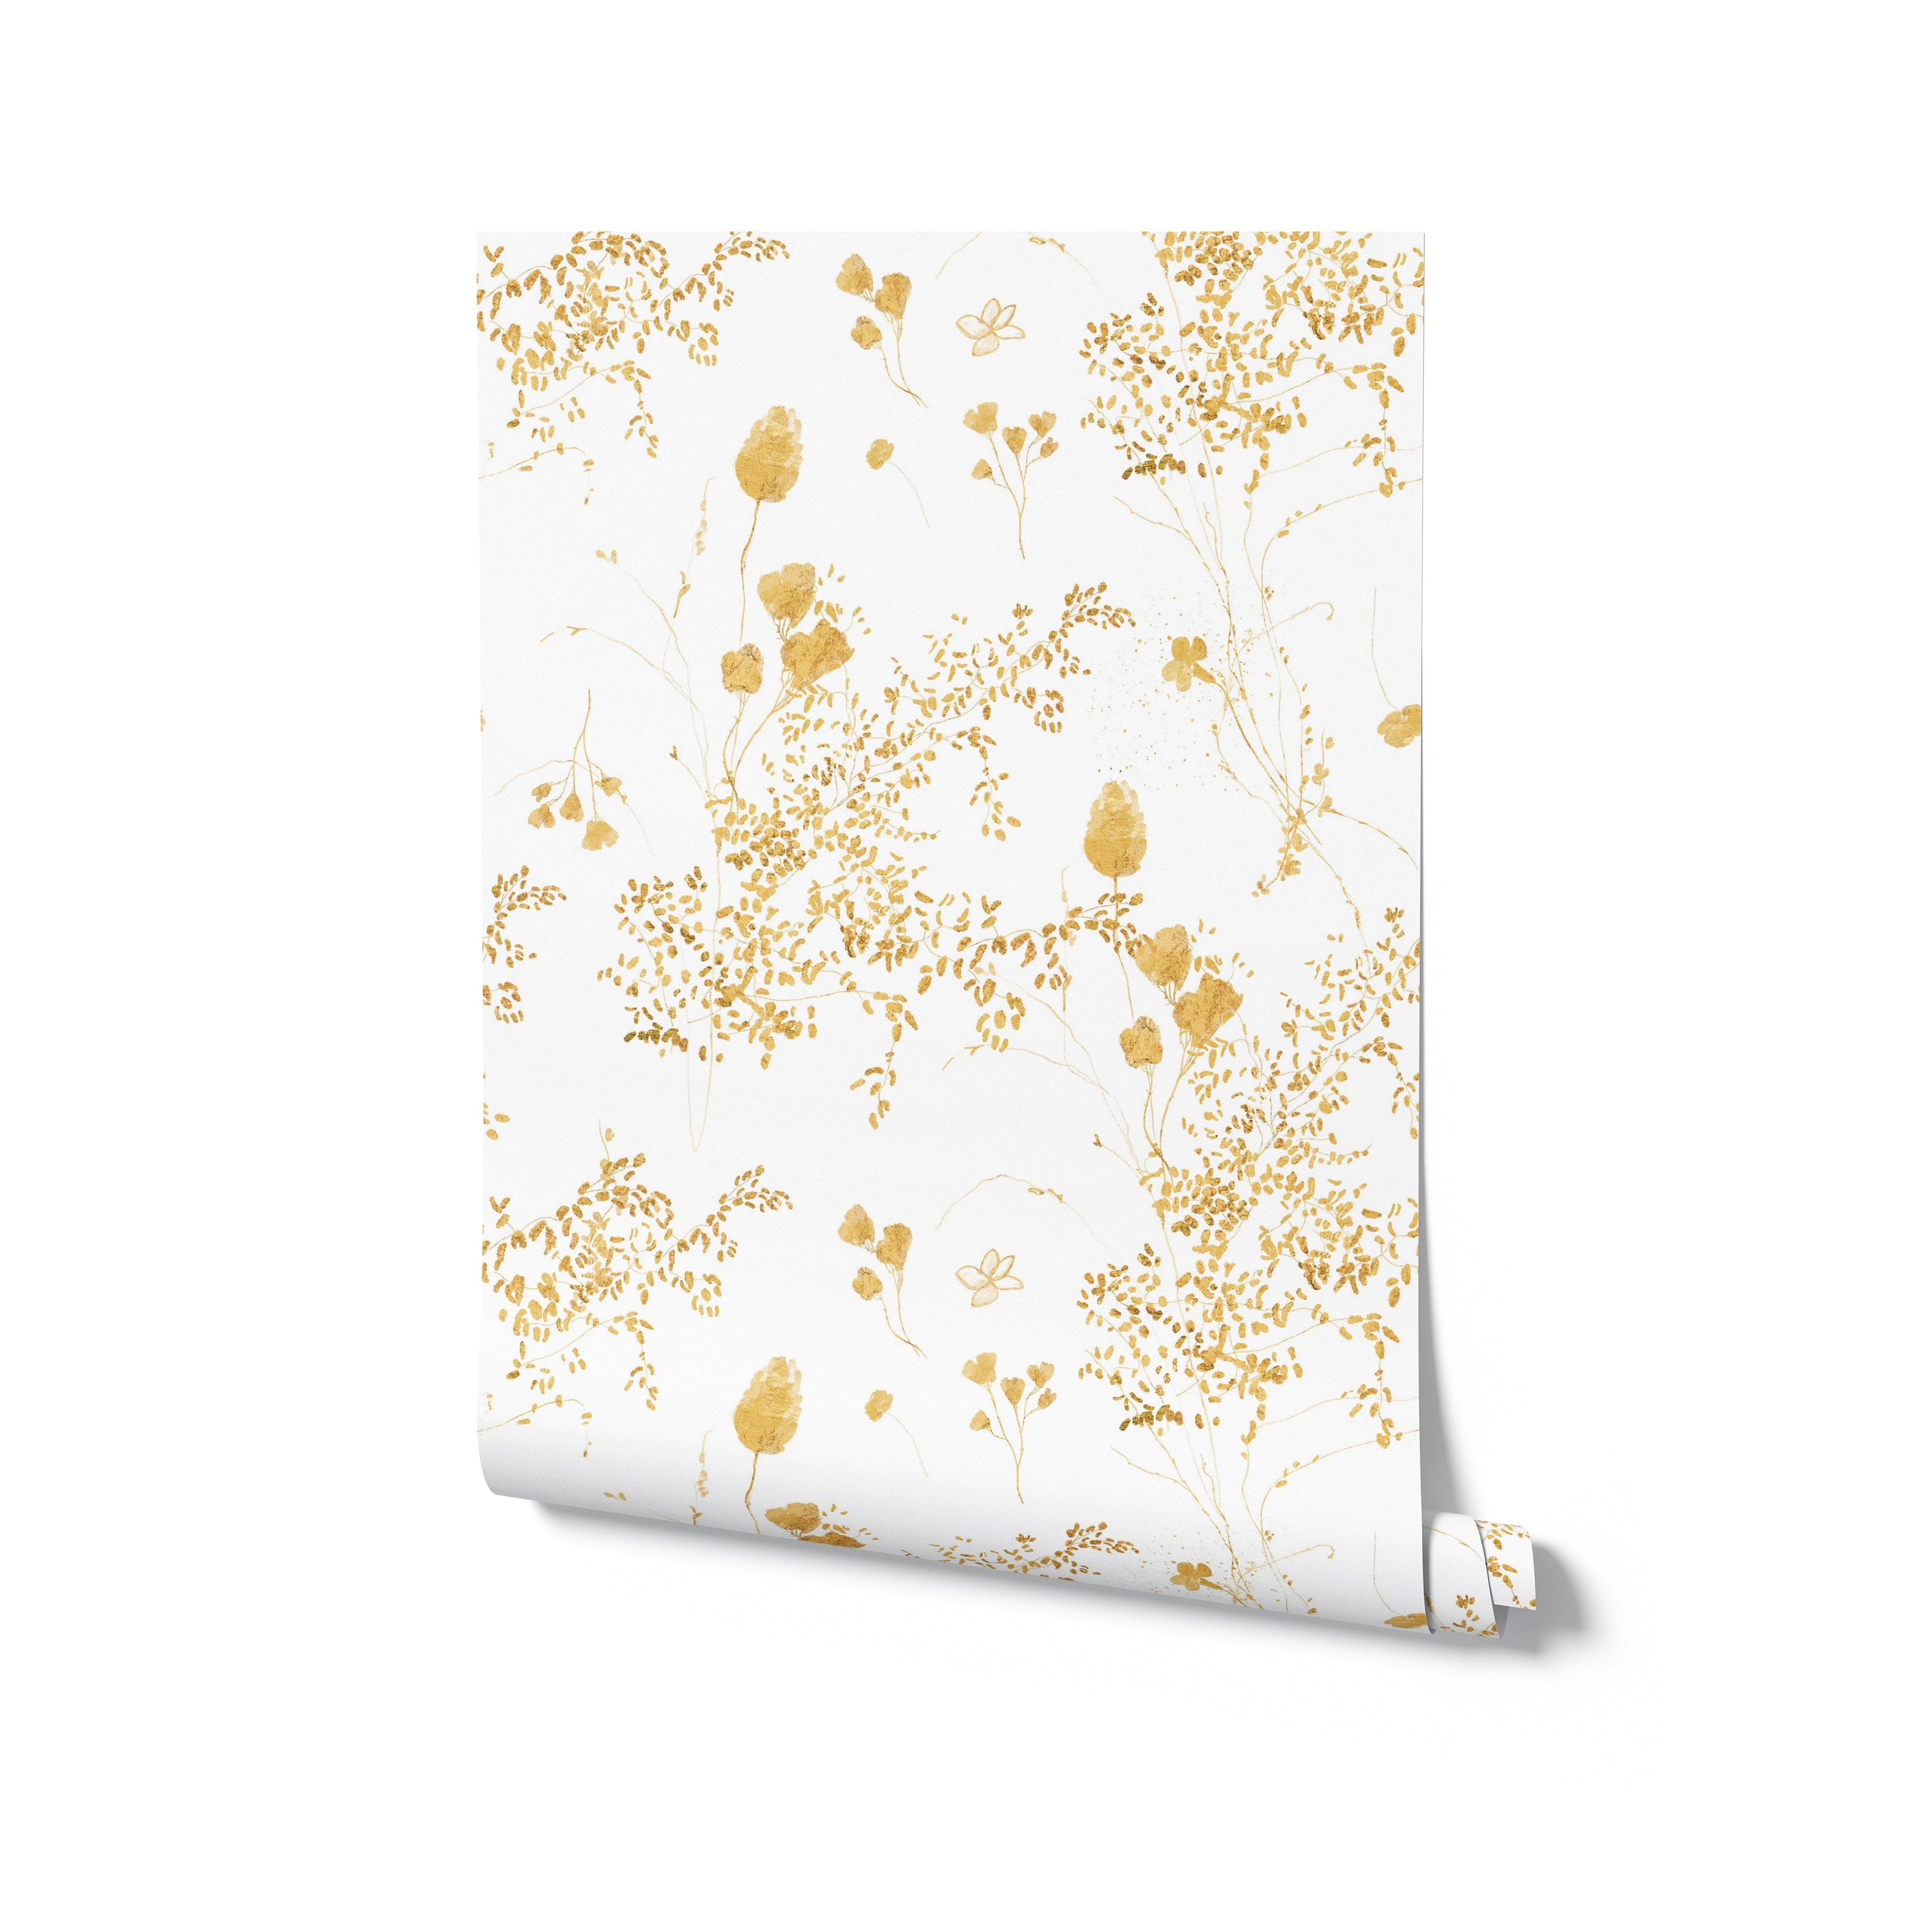 A rolled wallpaper sample displaying the Gold Floral Bunches pattern, with golden botanical illustrations offering a luxurious feel to interior decor.